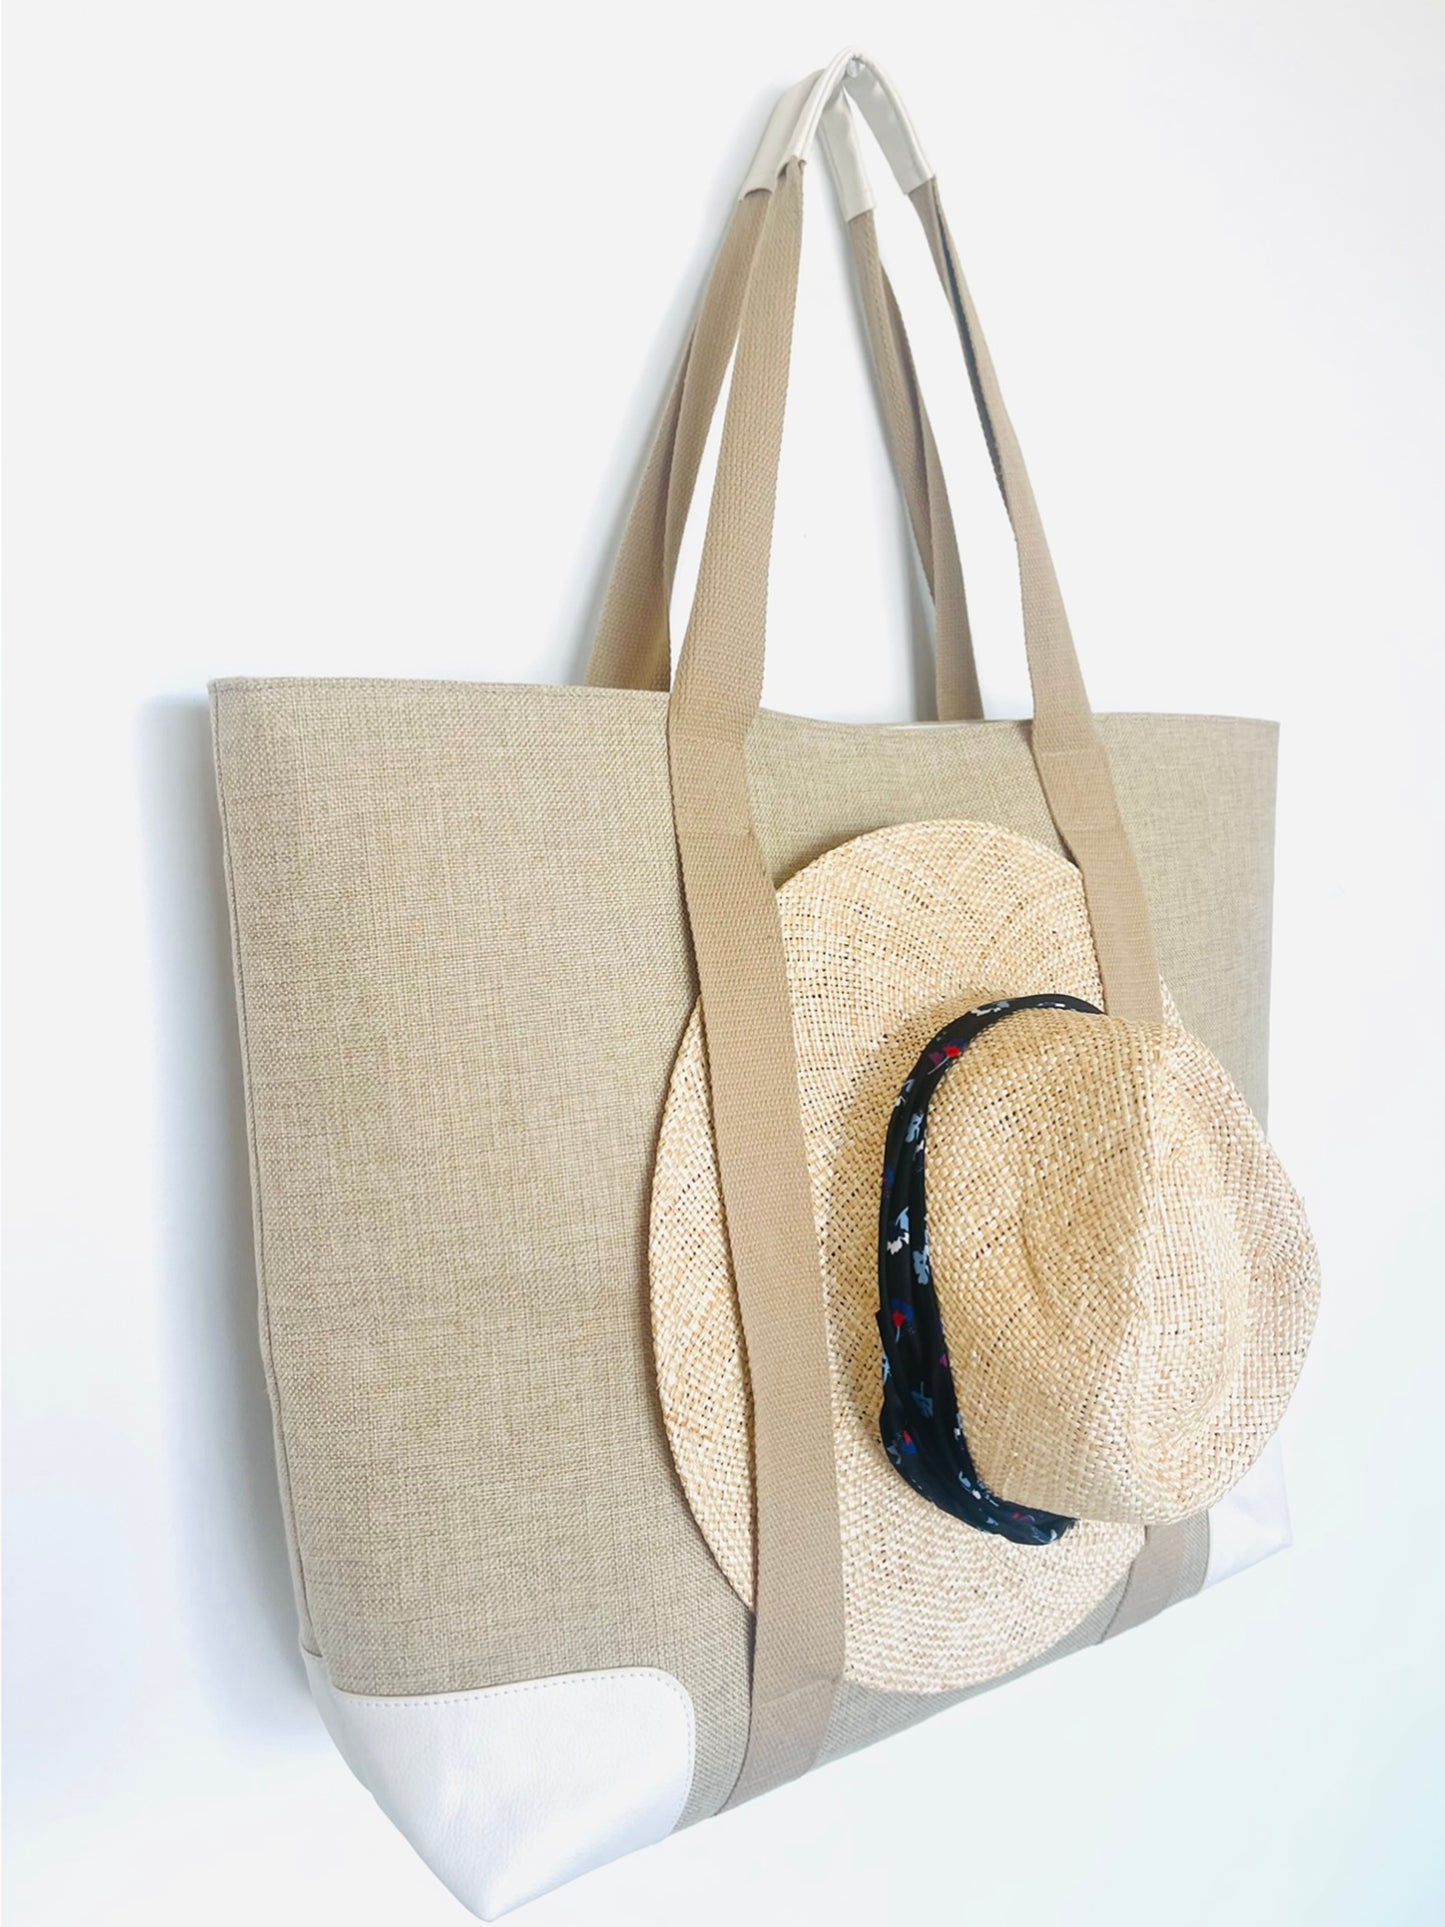 the native tote medium with hat hanging